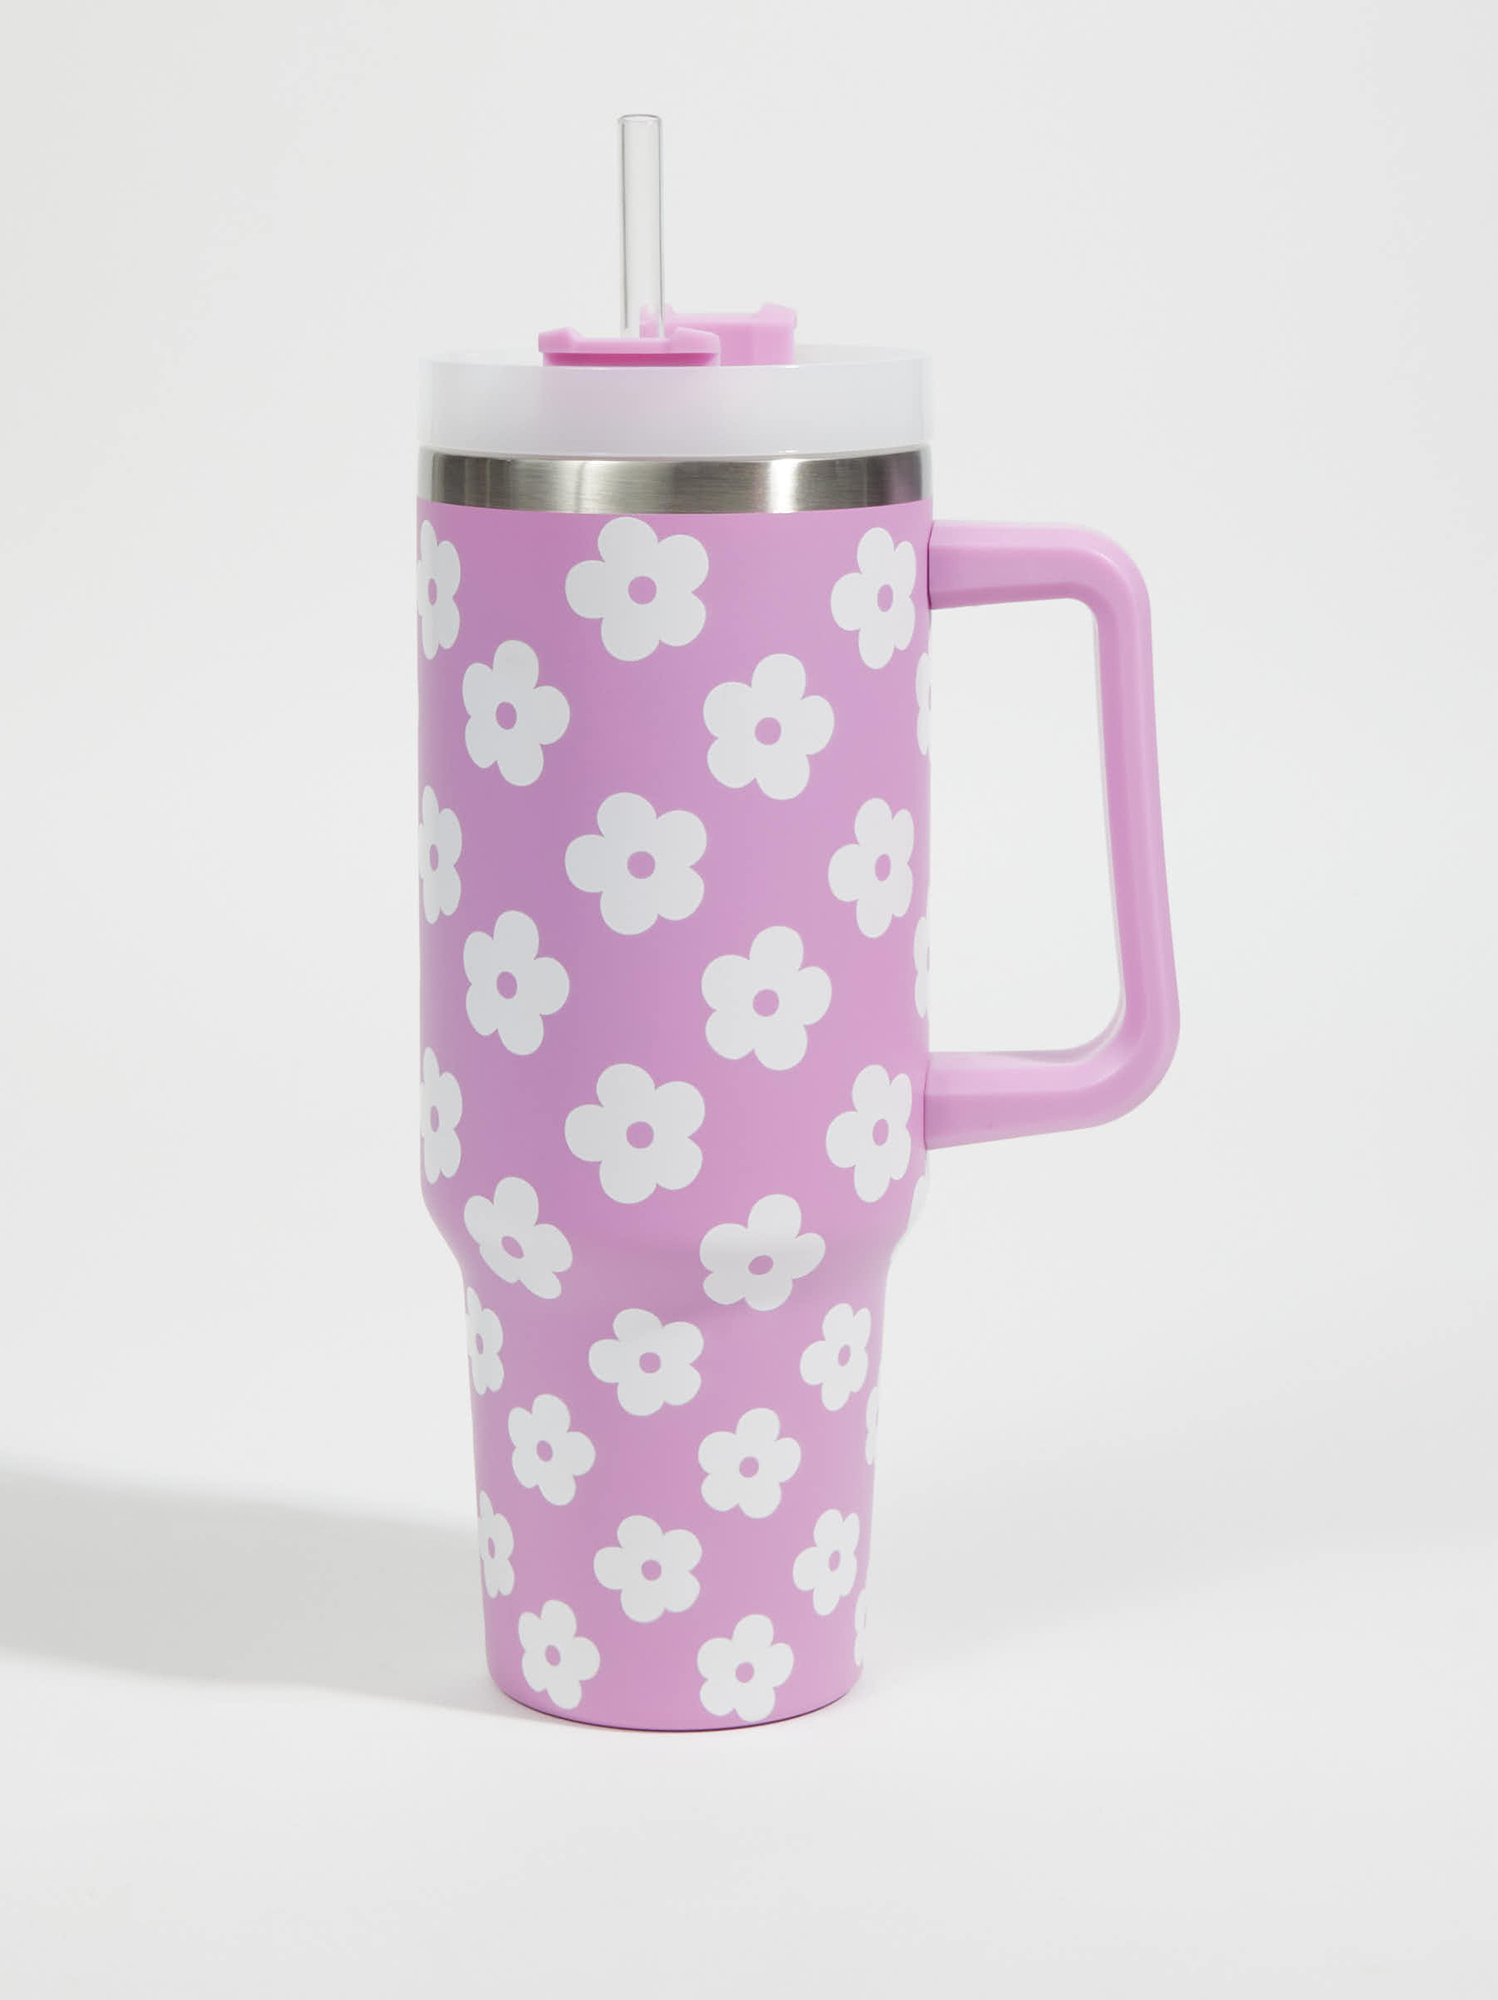 40oz Pink Floral Tumbler With Handle And Straw Lid Insulated